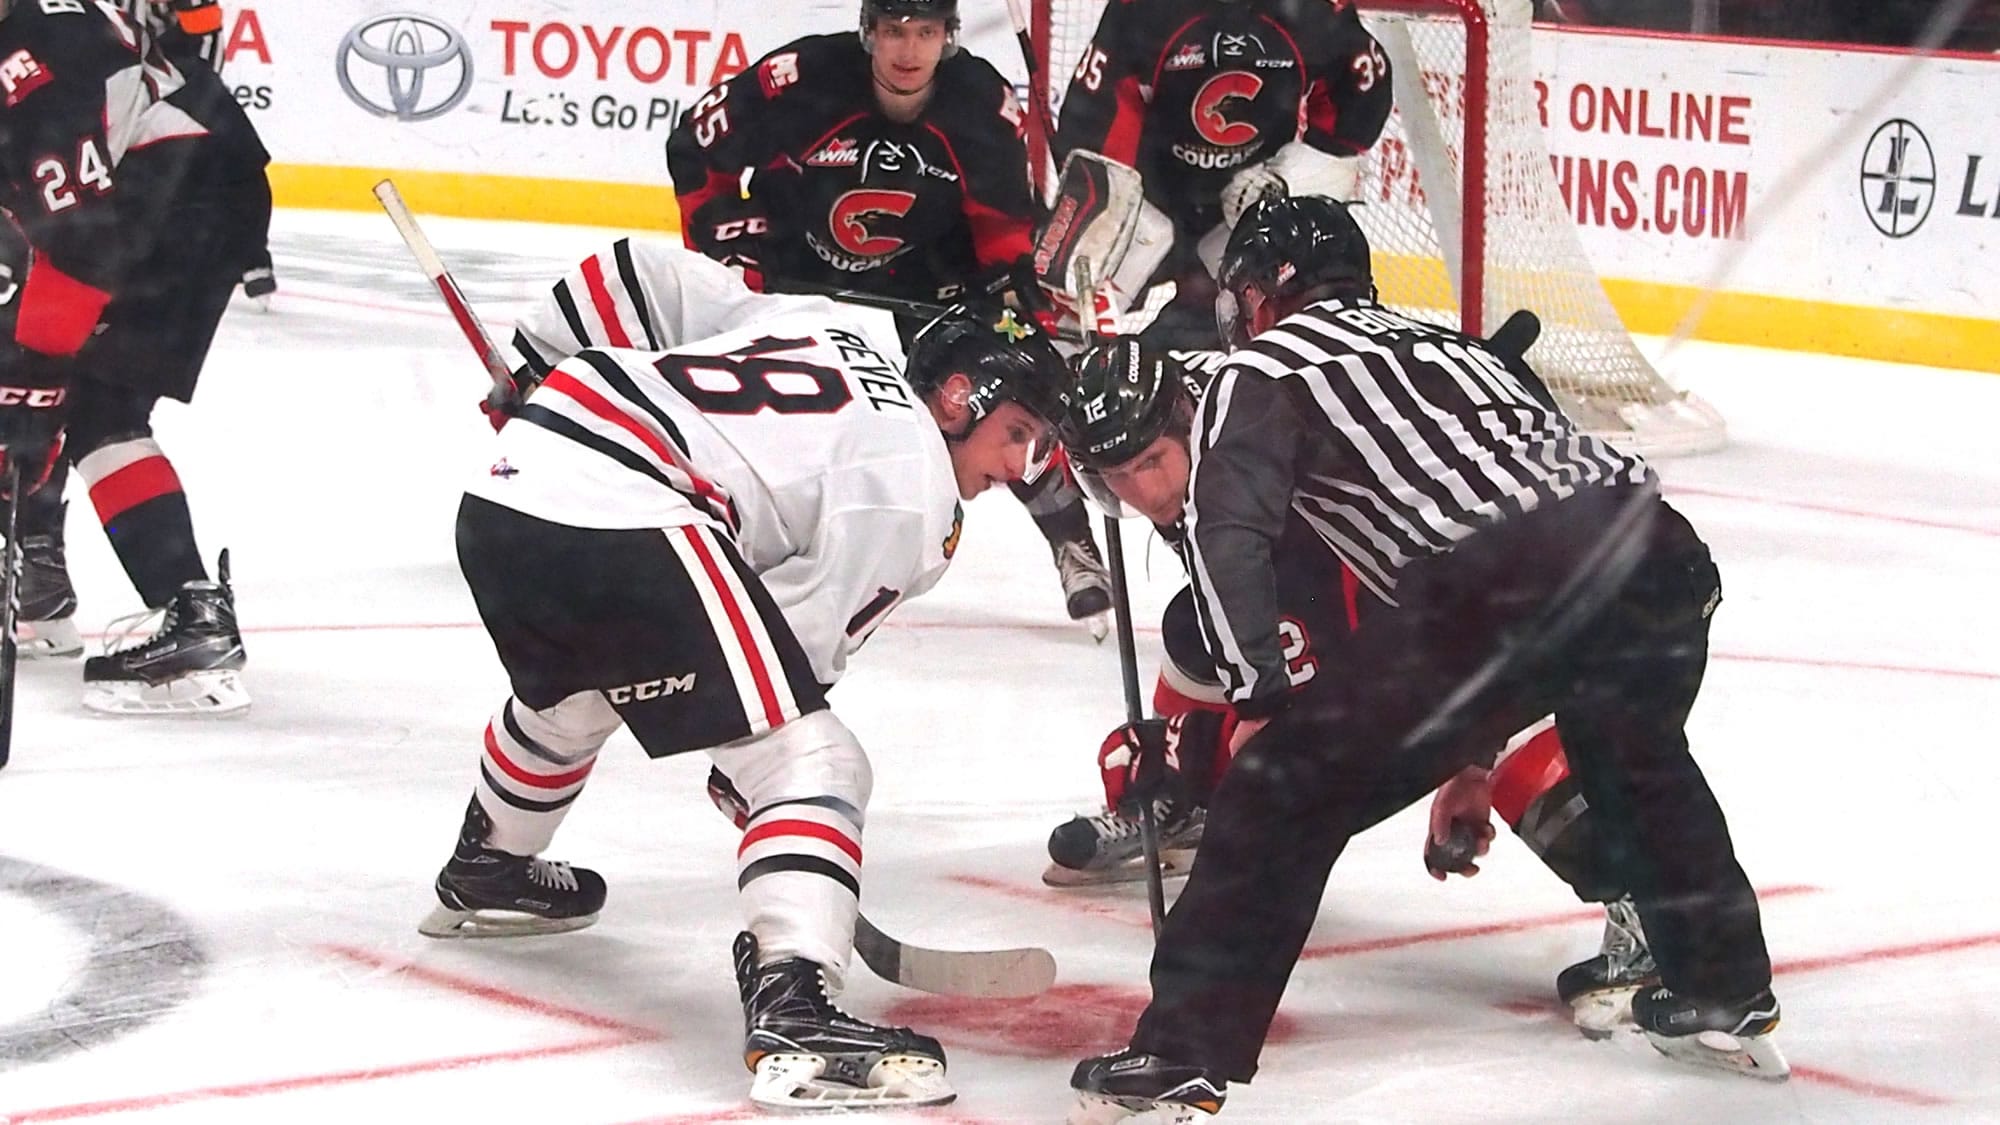 Portland Winterhawks center Matt Revel, left, scored the game-tying and winning goals in the third period as the Winterhawks beat Prince George 5-4 on Thursday in Game 4 of the first round of the Western Hockey League playoffs.